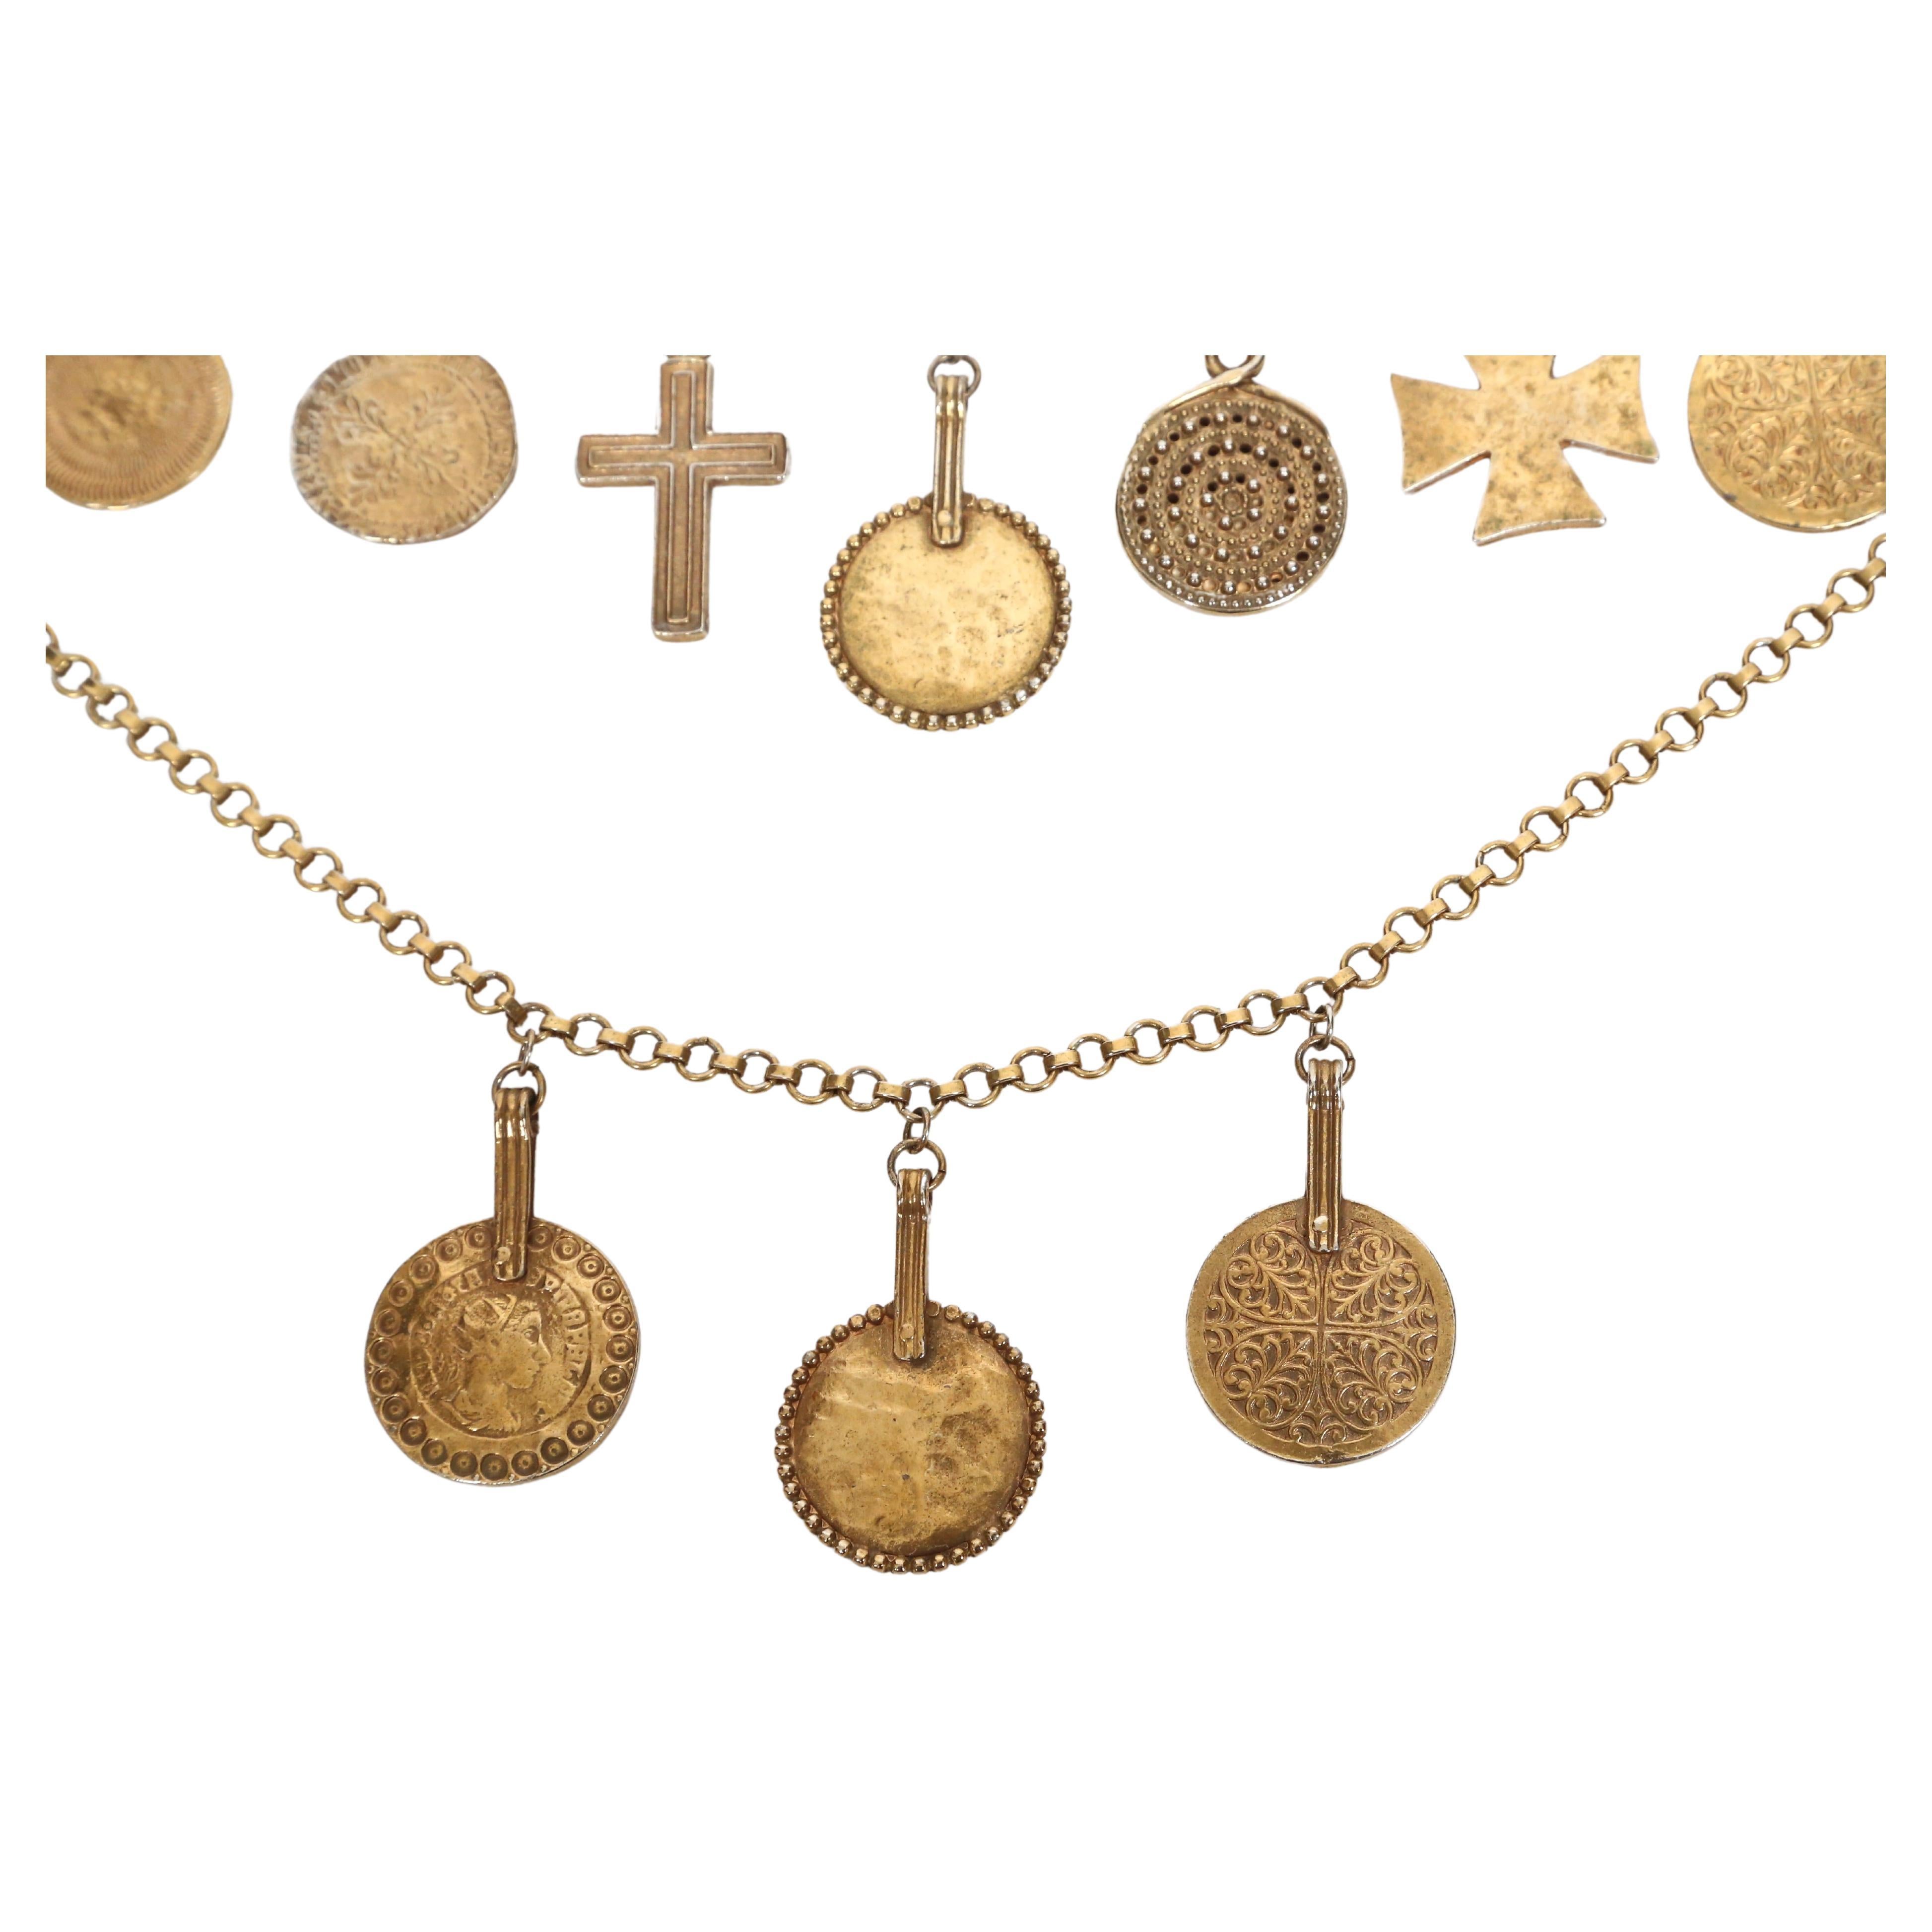 rare 1977 YVES SAINT LAURENT gilt coins and crosses charm necklace For Sale 3